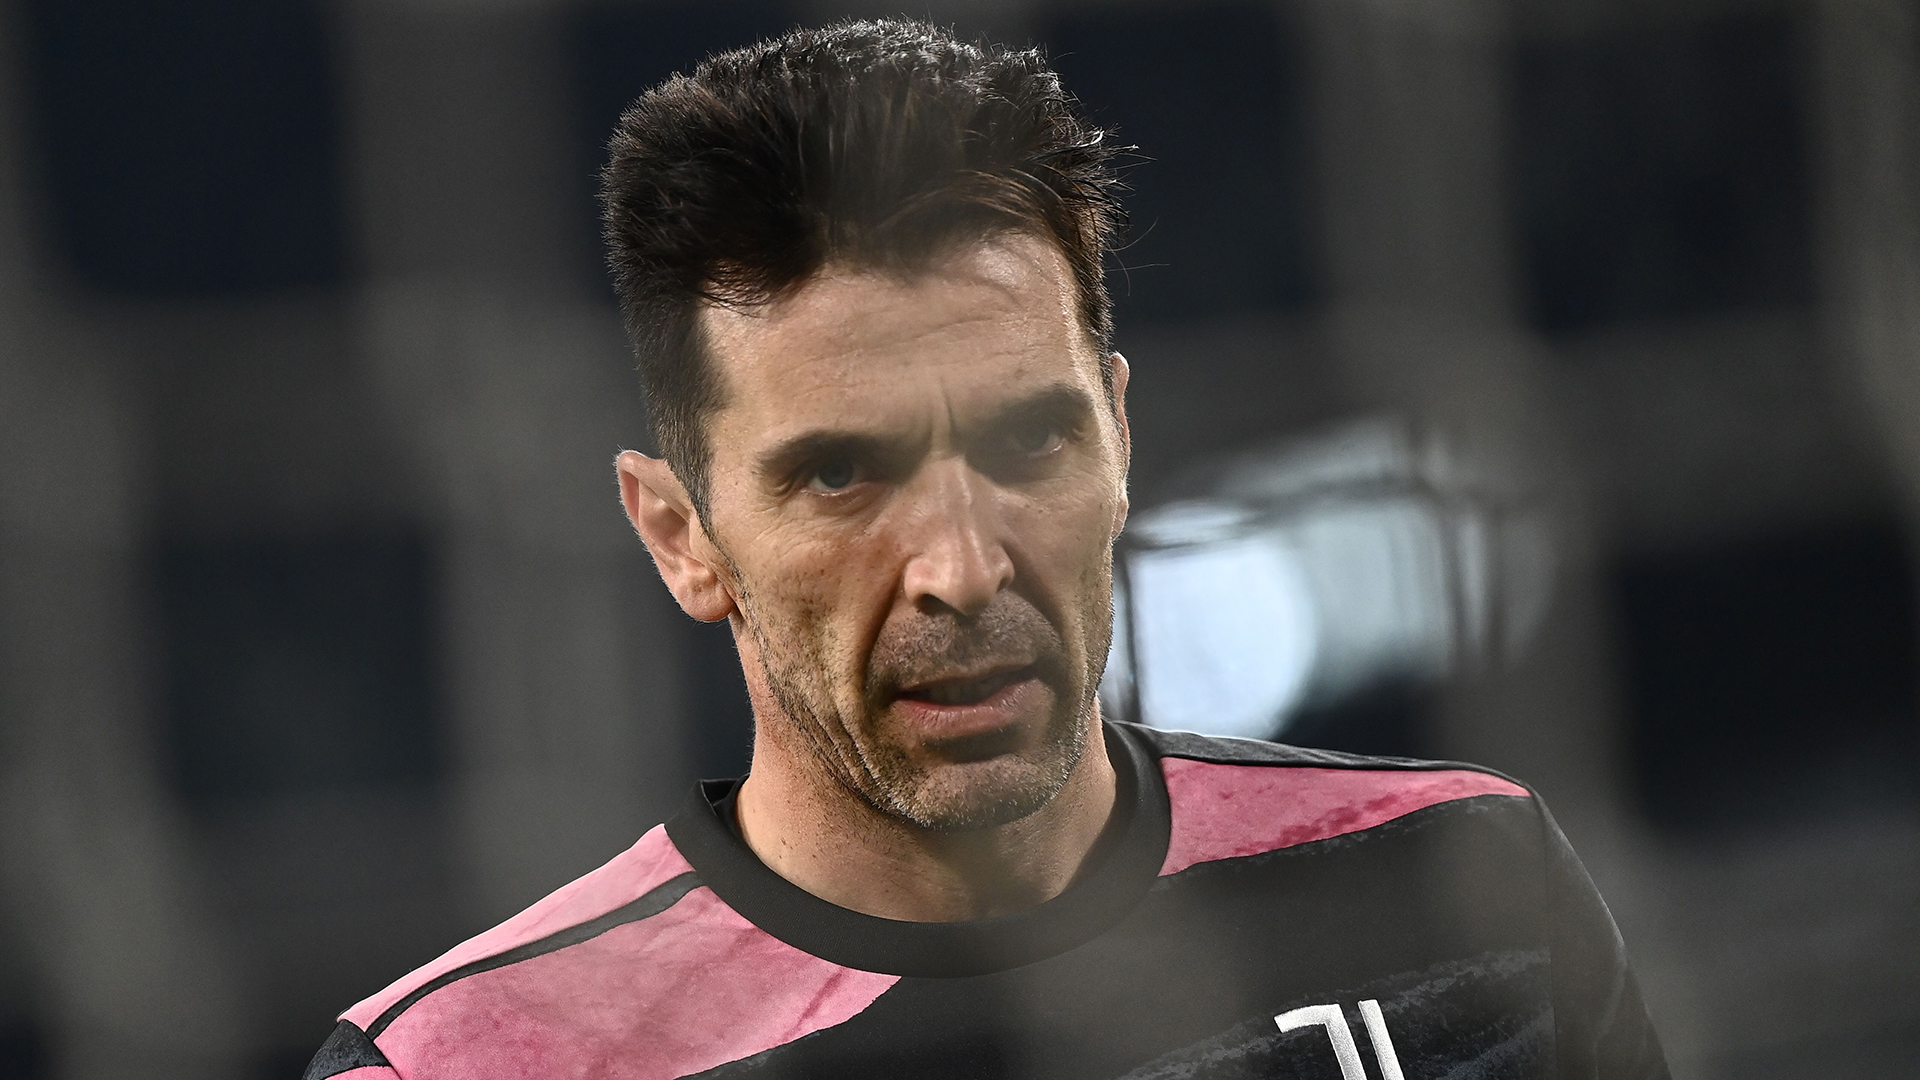 Buffon was one of the three players from the 2006 World Cup side who chose to stick with Juventus during Calciopoli, along with Del Piero and Camoranesi.